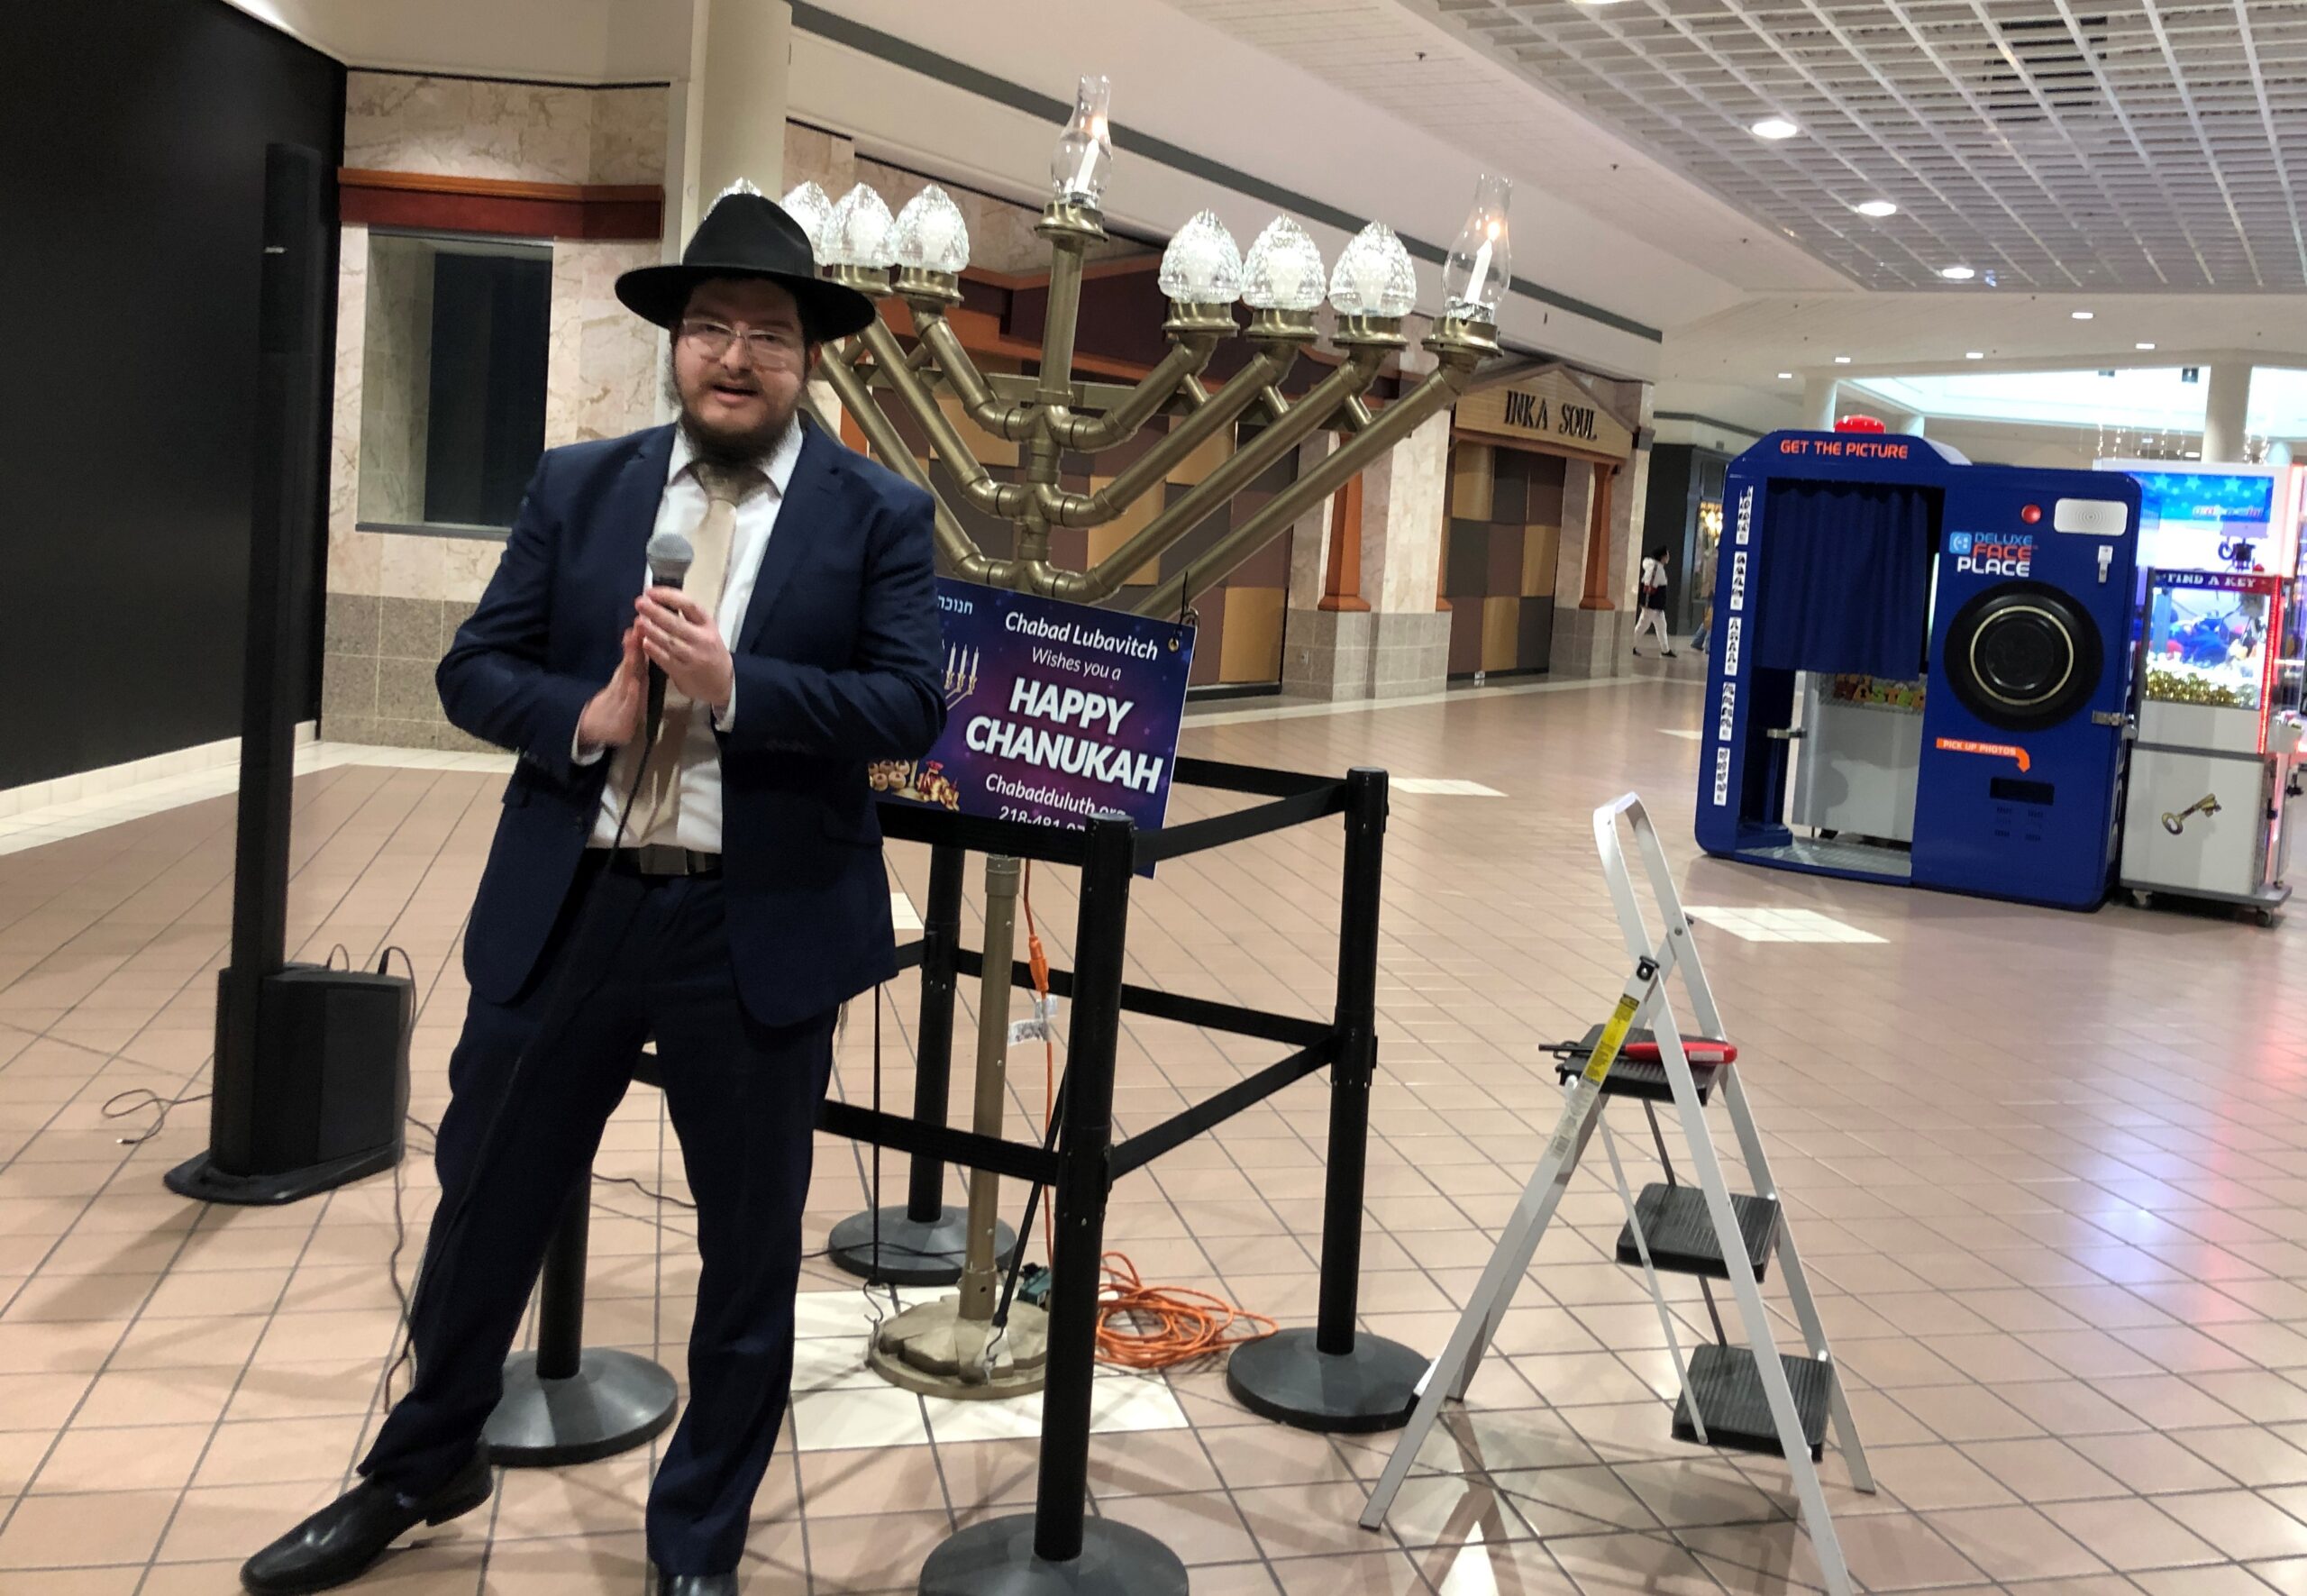 Rabbi Mendy Ross of Chabad of Duluth explains Hanukkah as he prepares to light the menorah at Miller Hill Mall in Duluth on the first night of the eight-day Jewish holiday on Sunday, Nov. 28. Photo by Robin Washington/WPR.